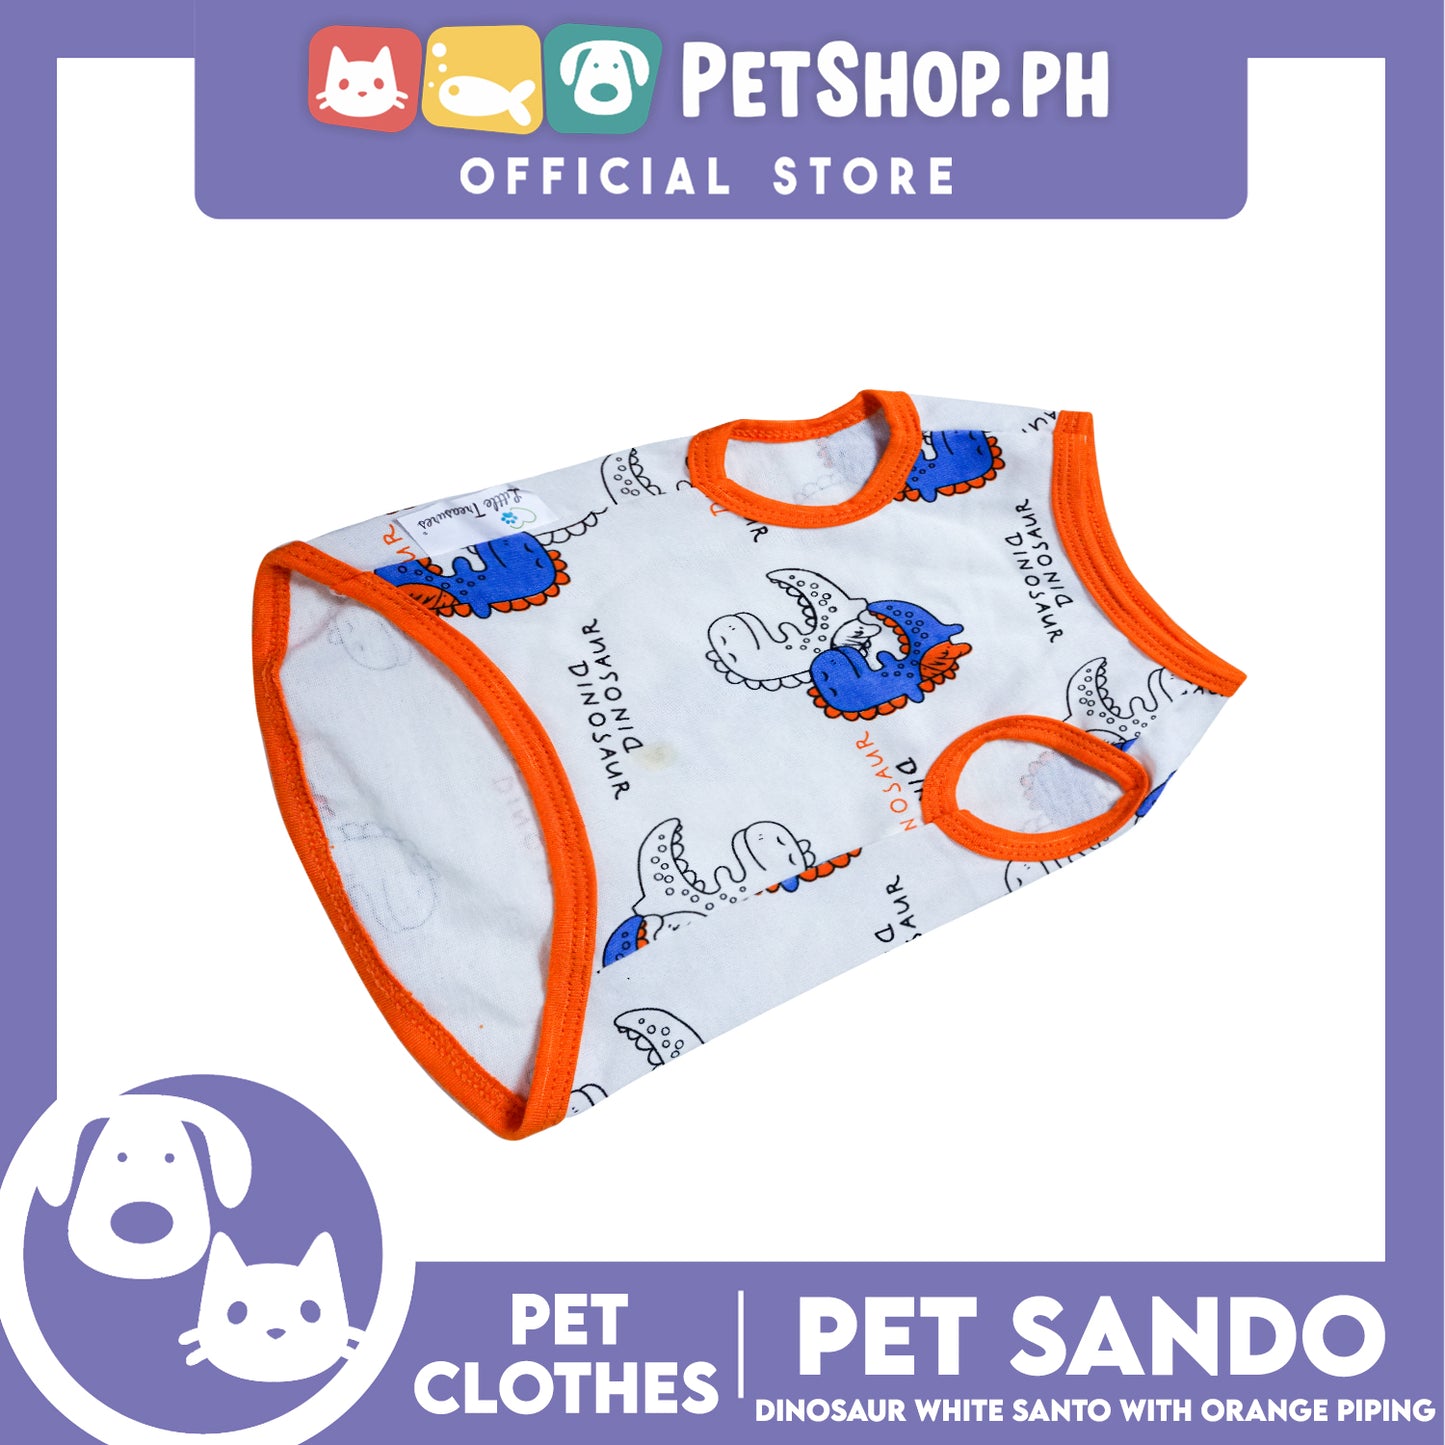 Pet Sando Dinosaur White with Orange Piping Sando (Large) Perfect Fit for Dogs and Cats